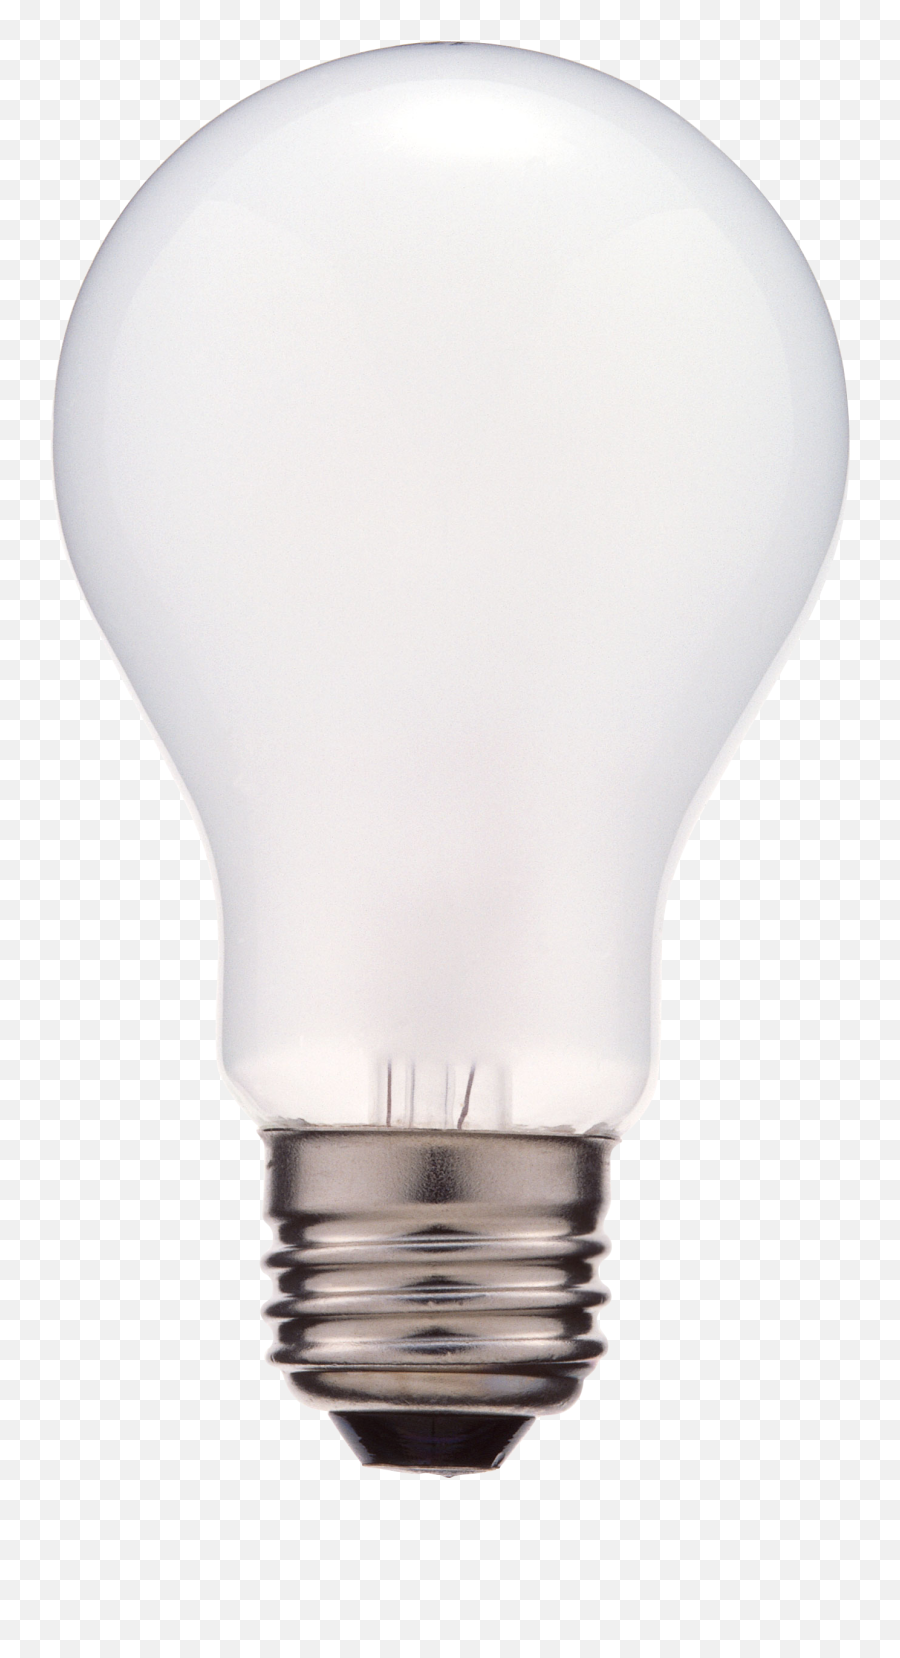 Lamp Png Image Electric Lighter Stained Glass Lamps - Lampara Incandescente Png,Light Bulbs Png